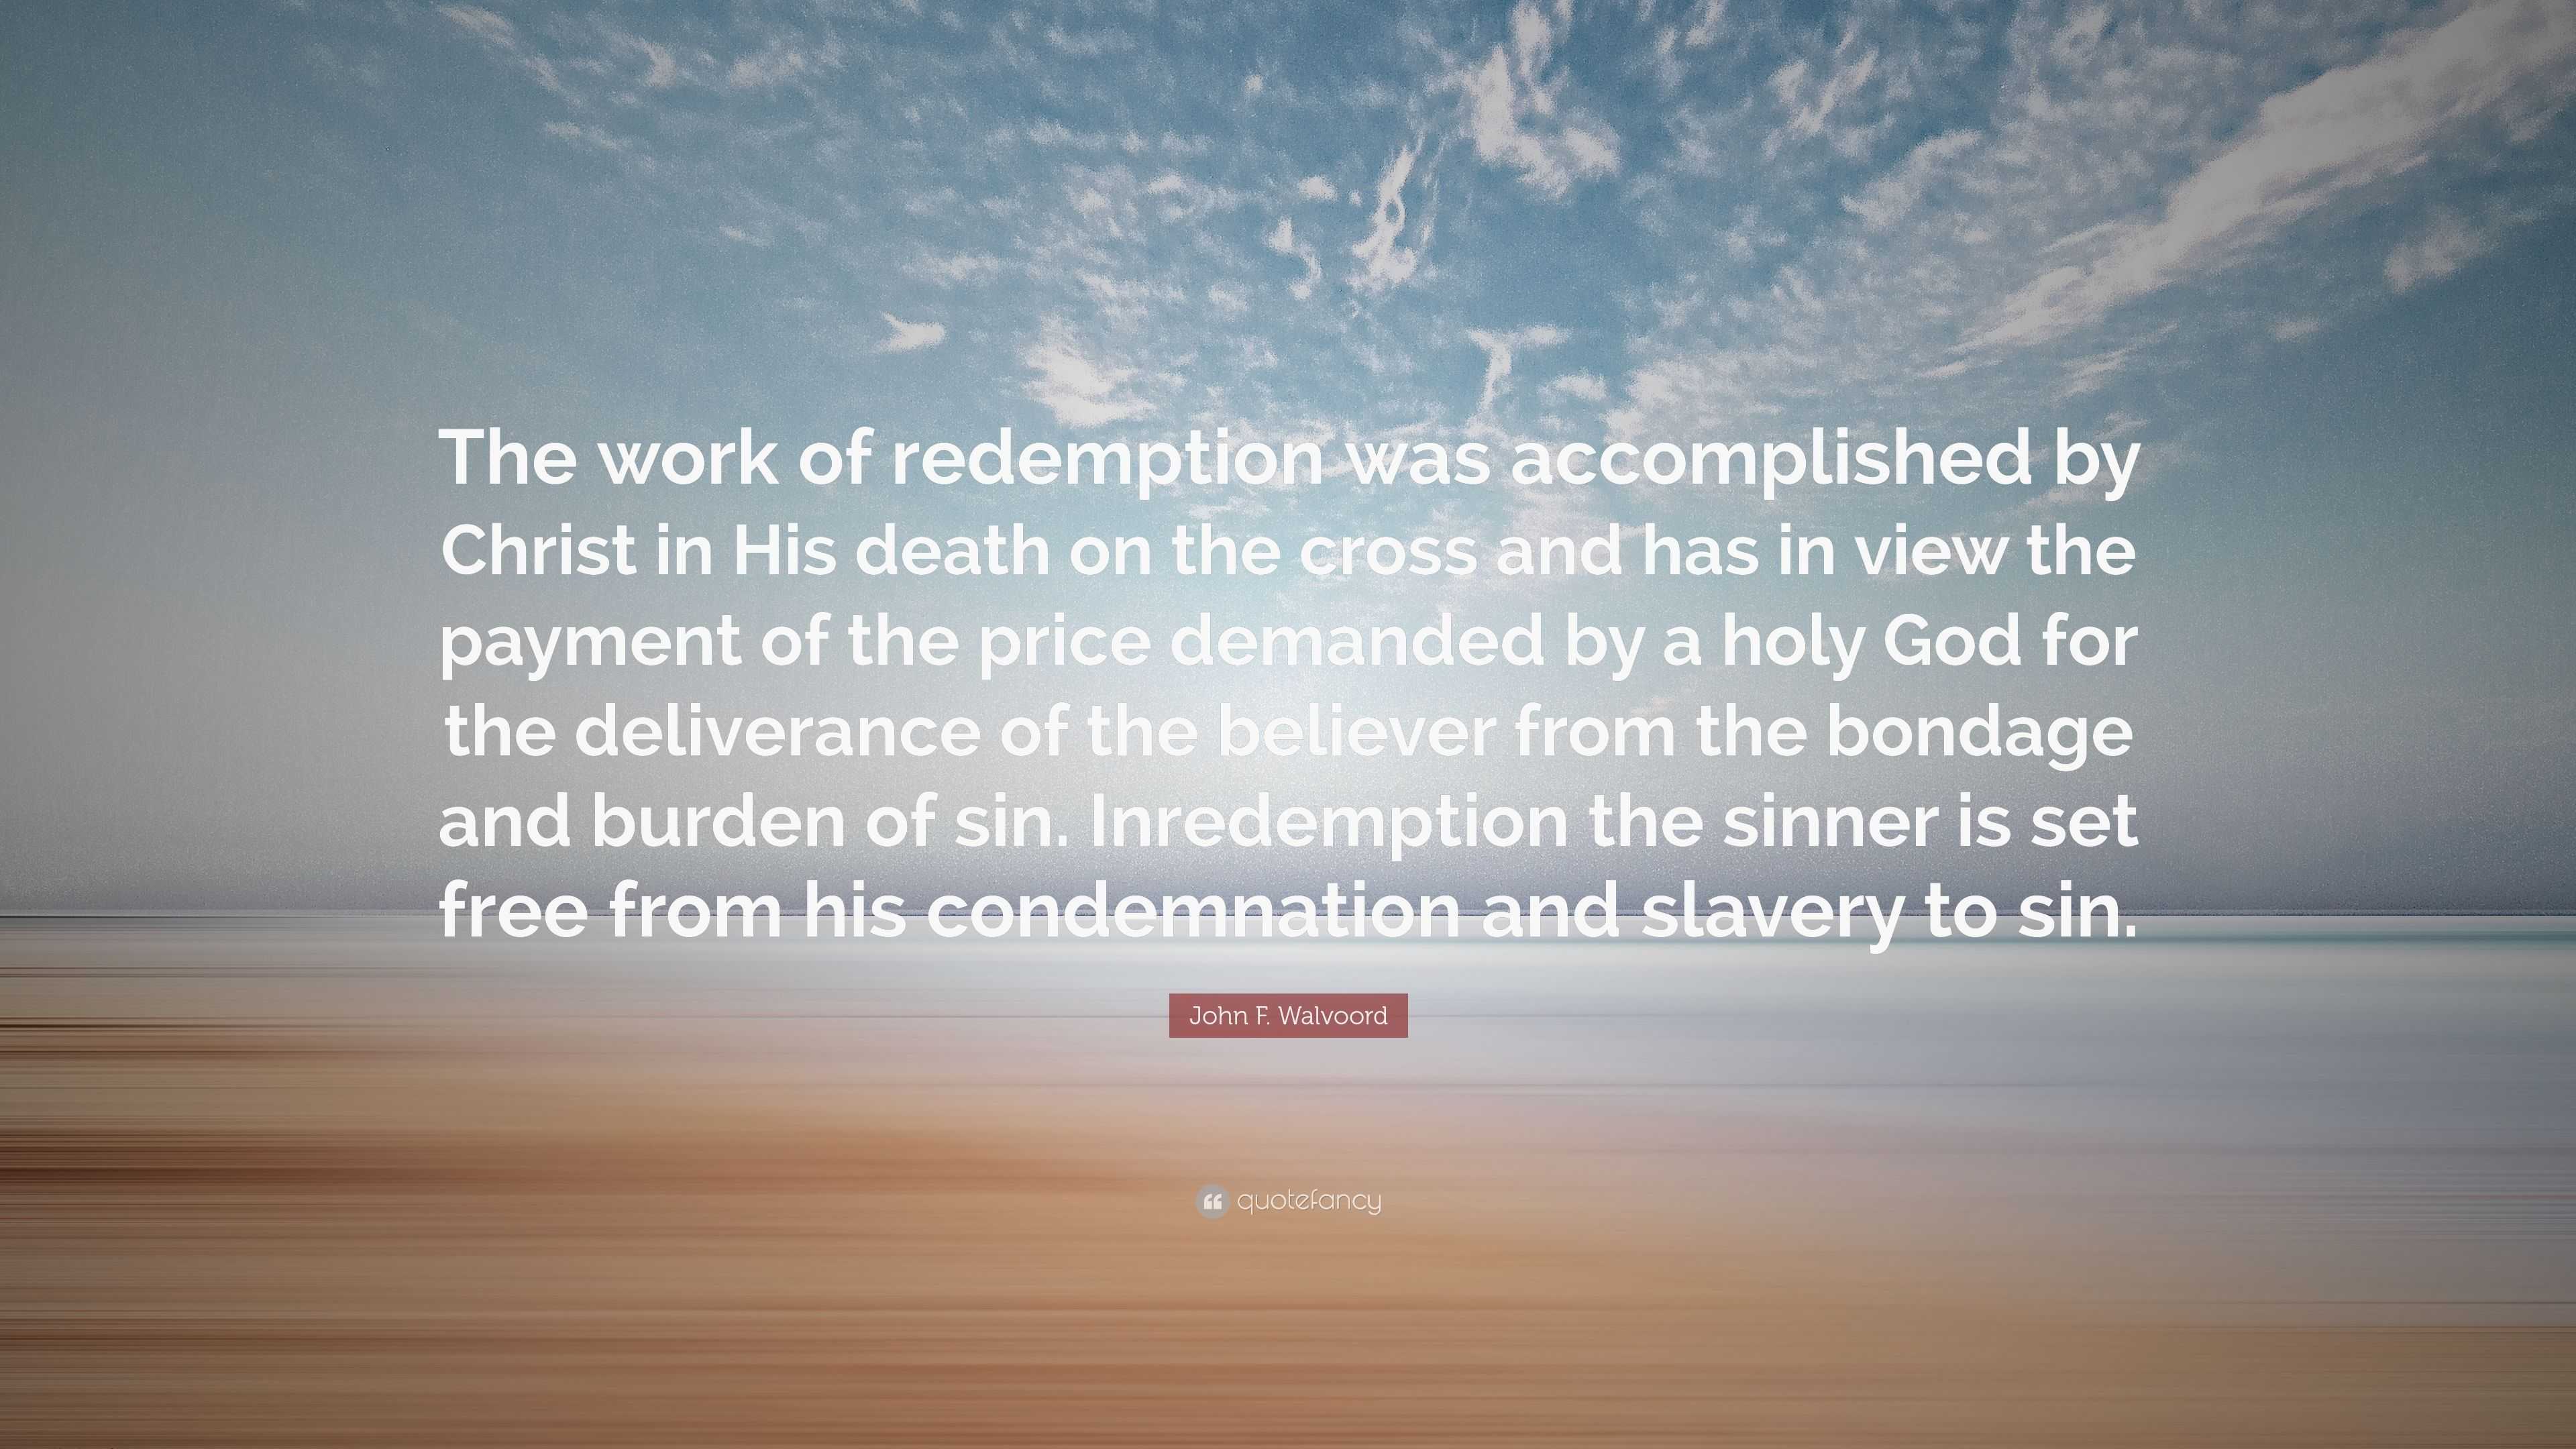 John F. Walvoord Quote: “The work of redemption was accomplished by ...